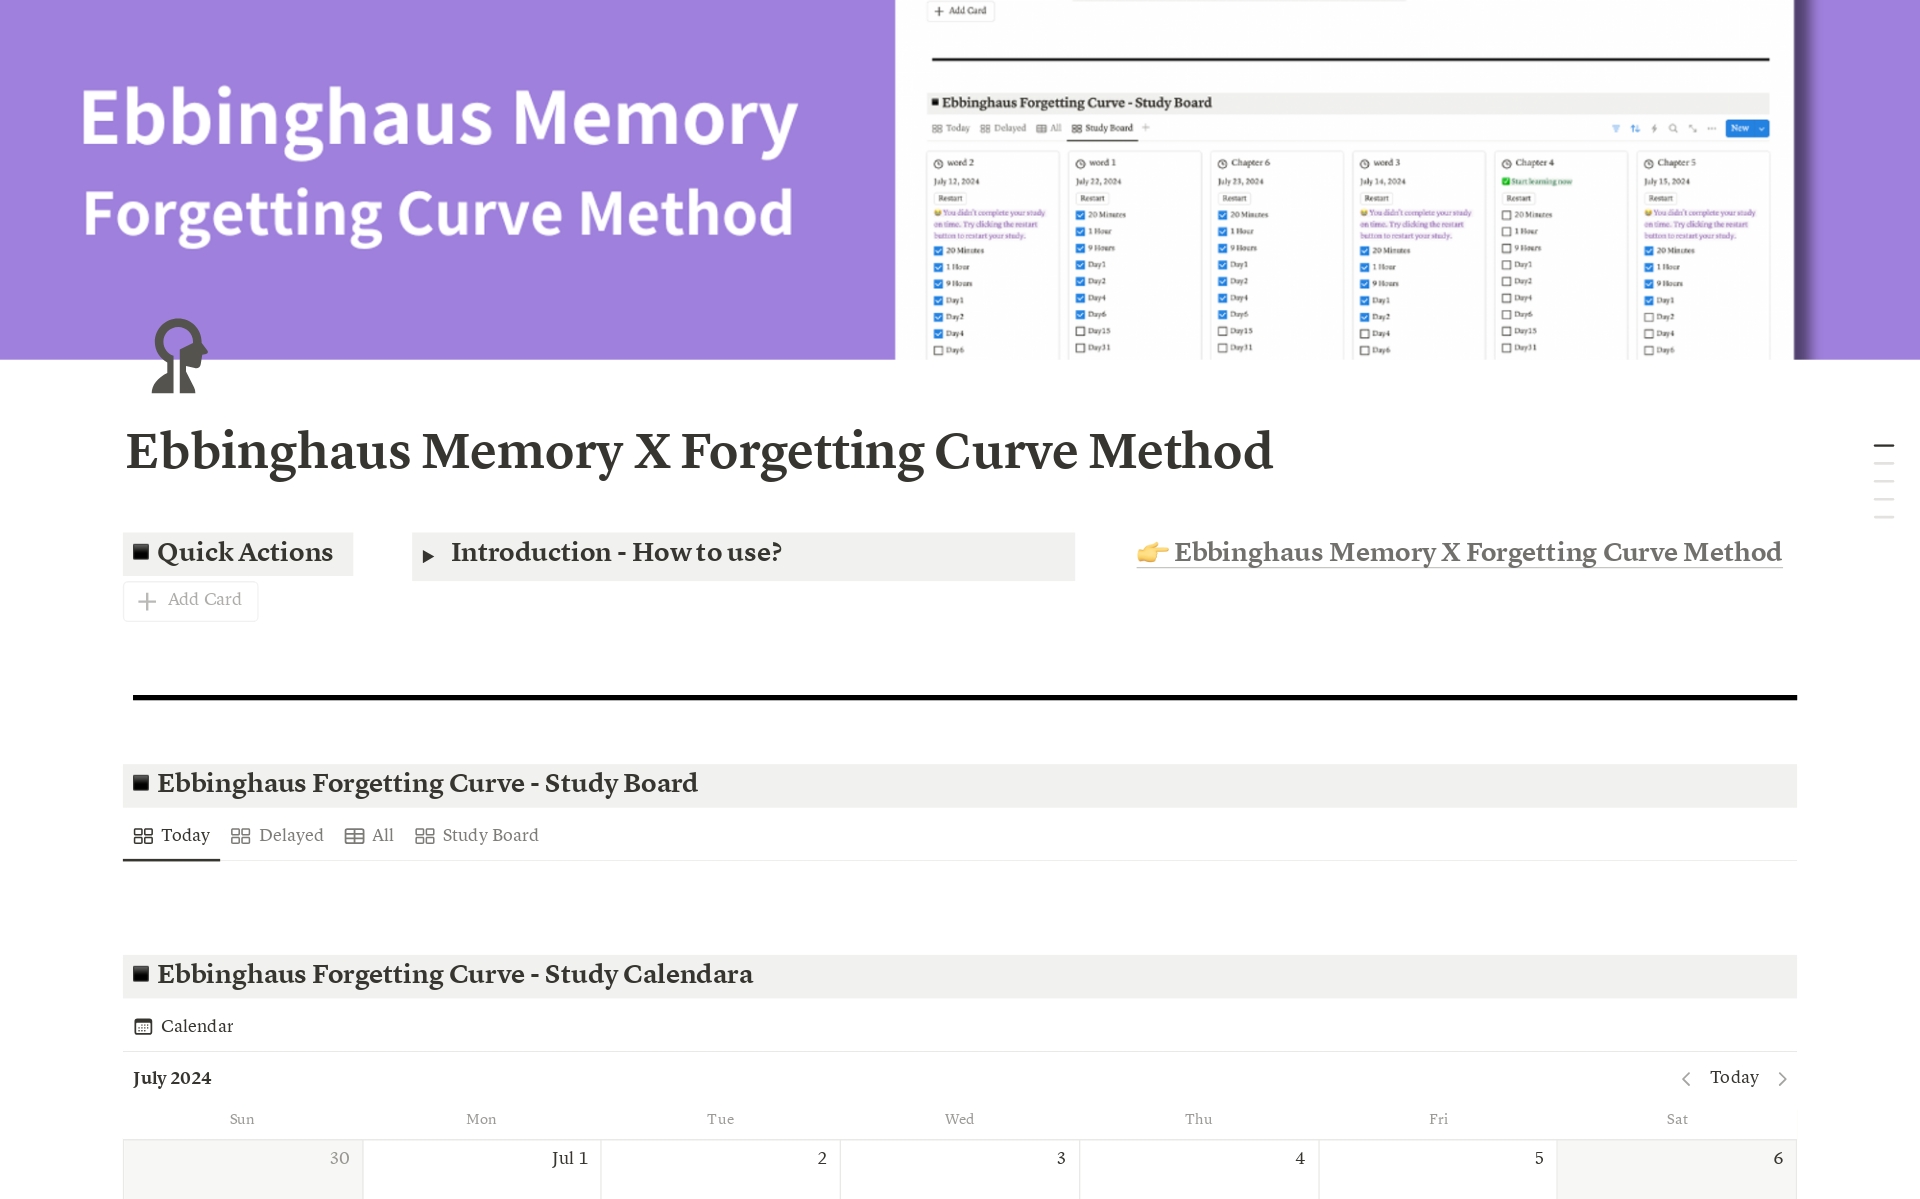 This template is designed to help you use the Ebbinghaus memory forgetting curve method for efficient learning and review. It includes multiple views and features to ensure that your study tasks are systematically managed and effectively executed.